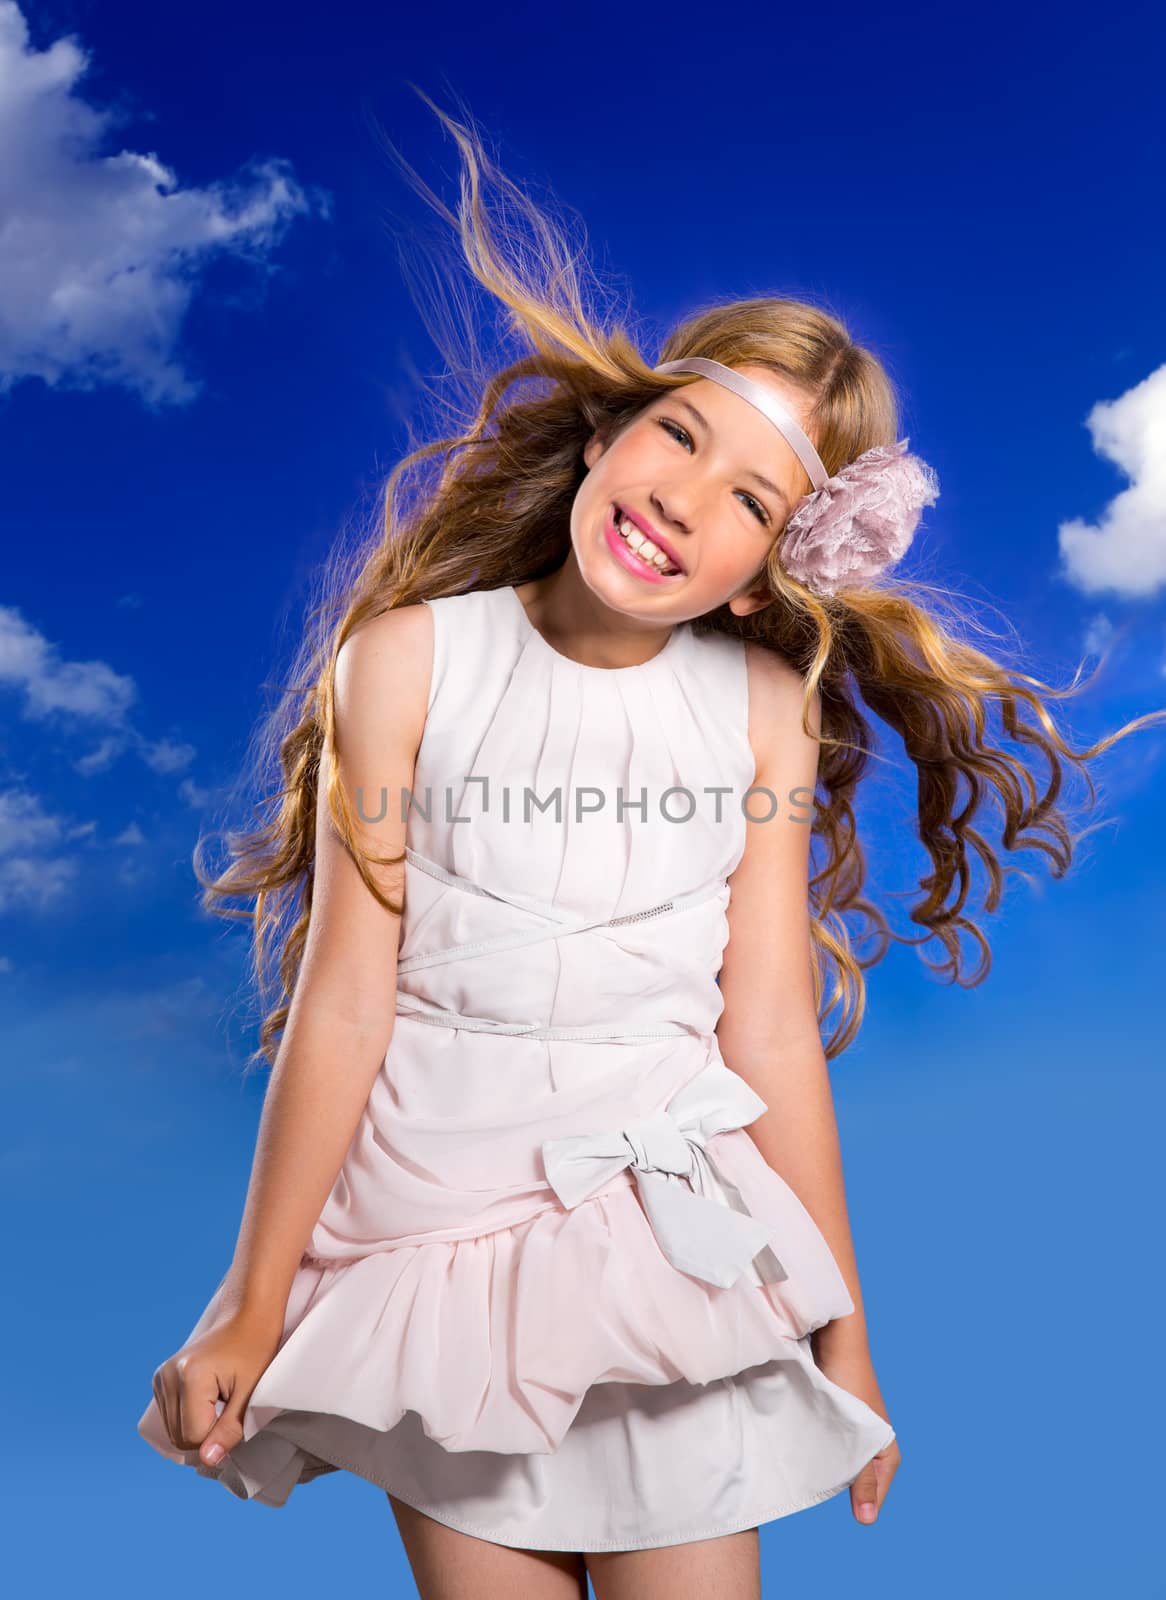 Blond happy girl with fashion dress and wind blowing hair in a blue sky background